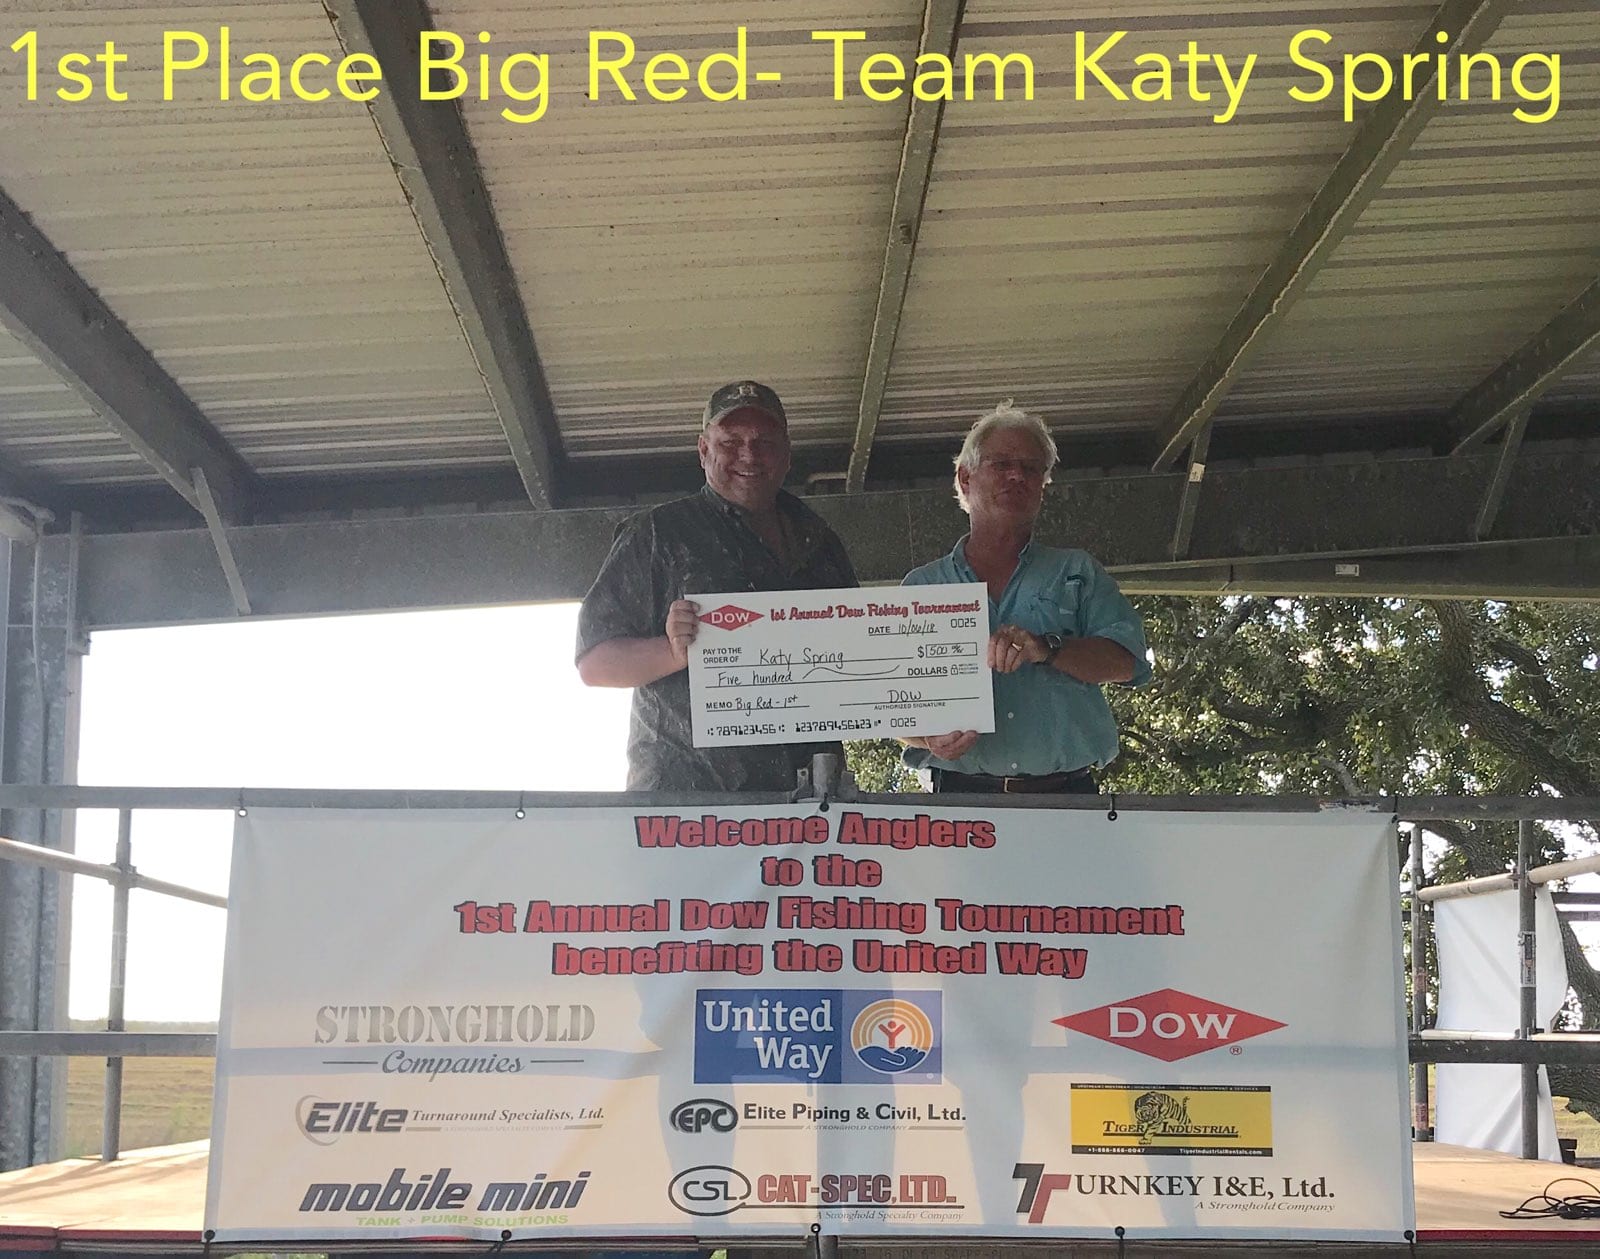 Team Katy Spring - 1st place Big Red Fishing